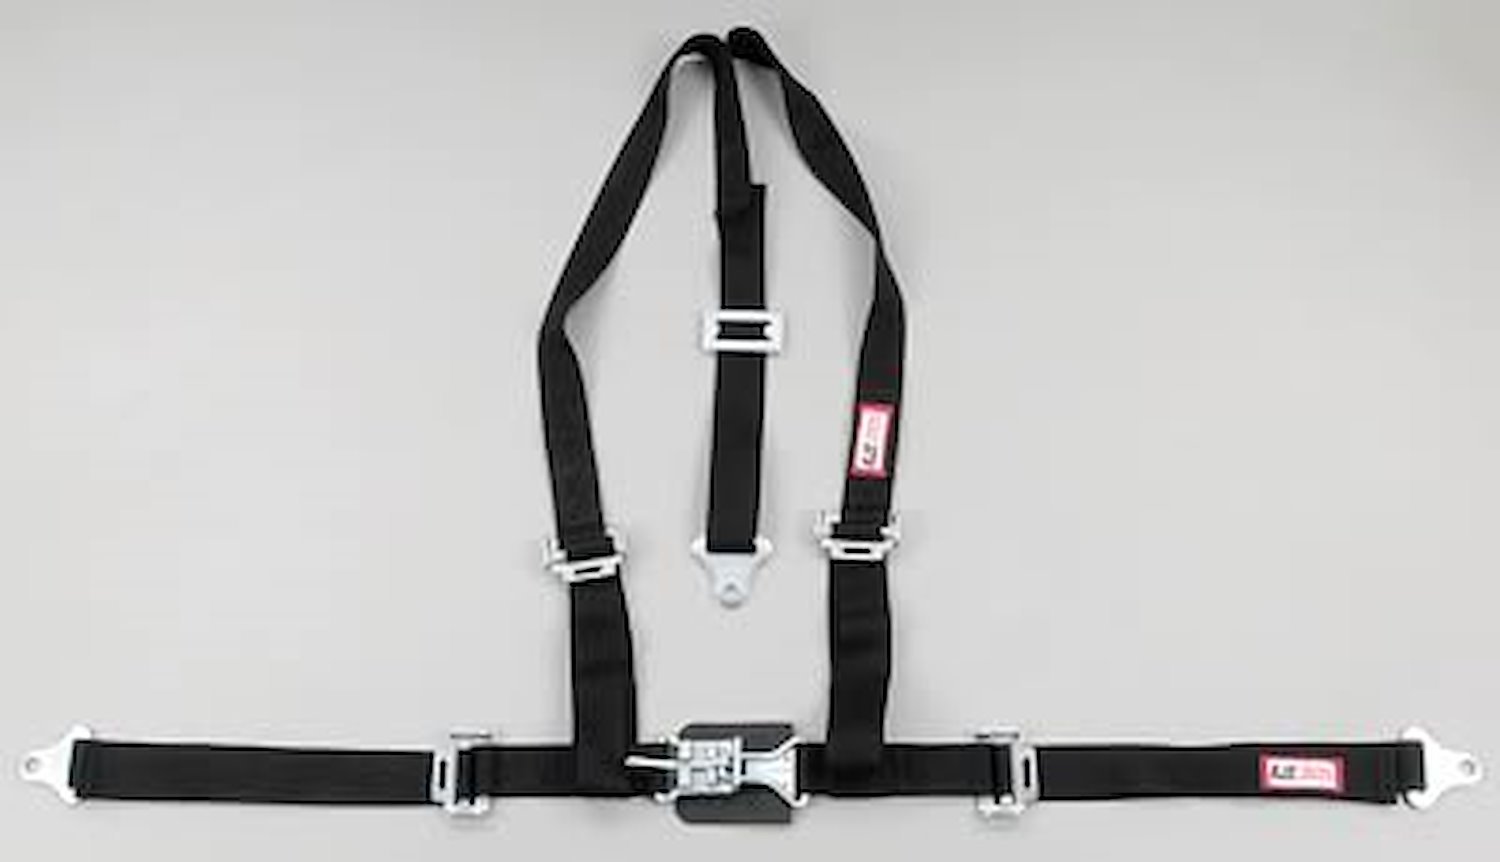 NON-SFI L&L HARNESS 3 PULL DOWN Lap BELT SNAP SEWN IN 2 S.H. Y FLOOR Mount w/STERNUM STRAP WRAP/BOLT HOT PINK